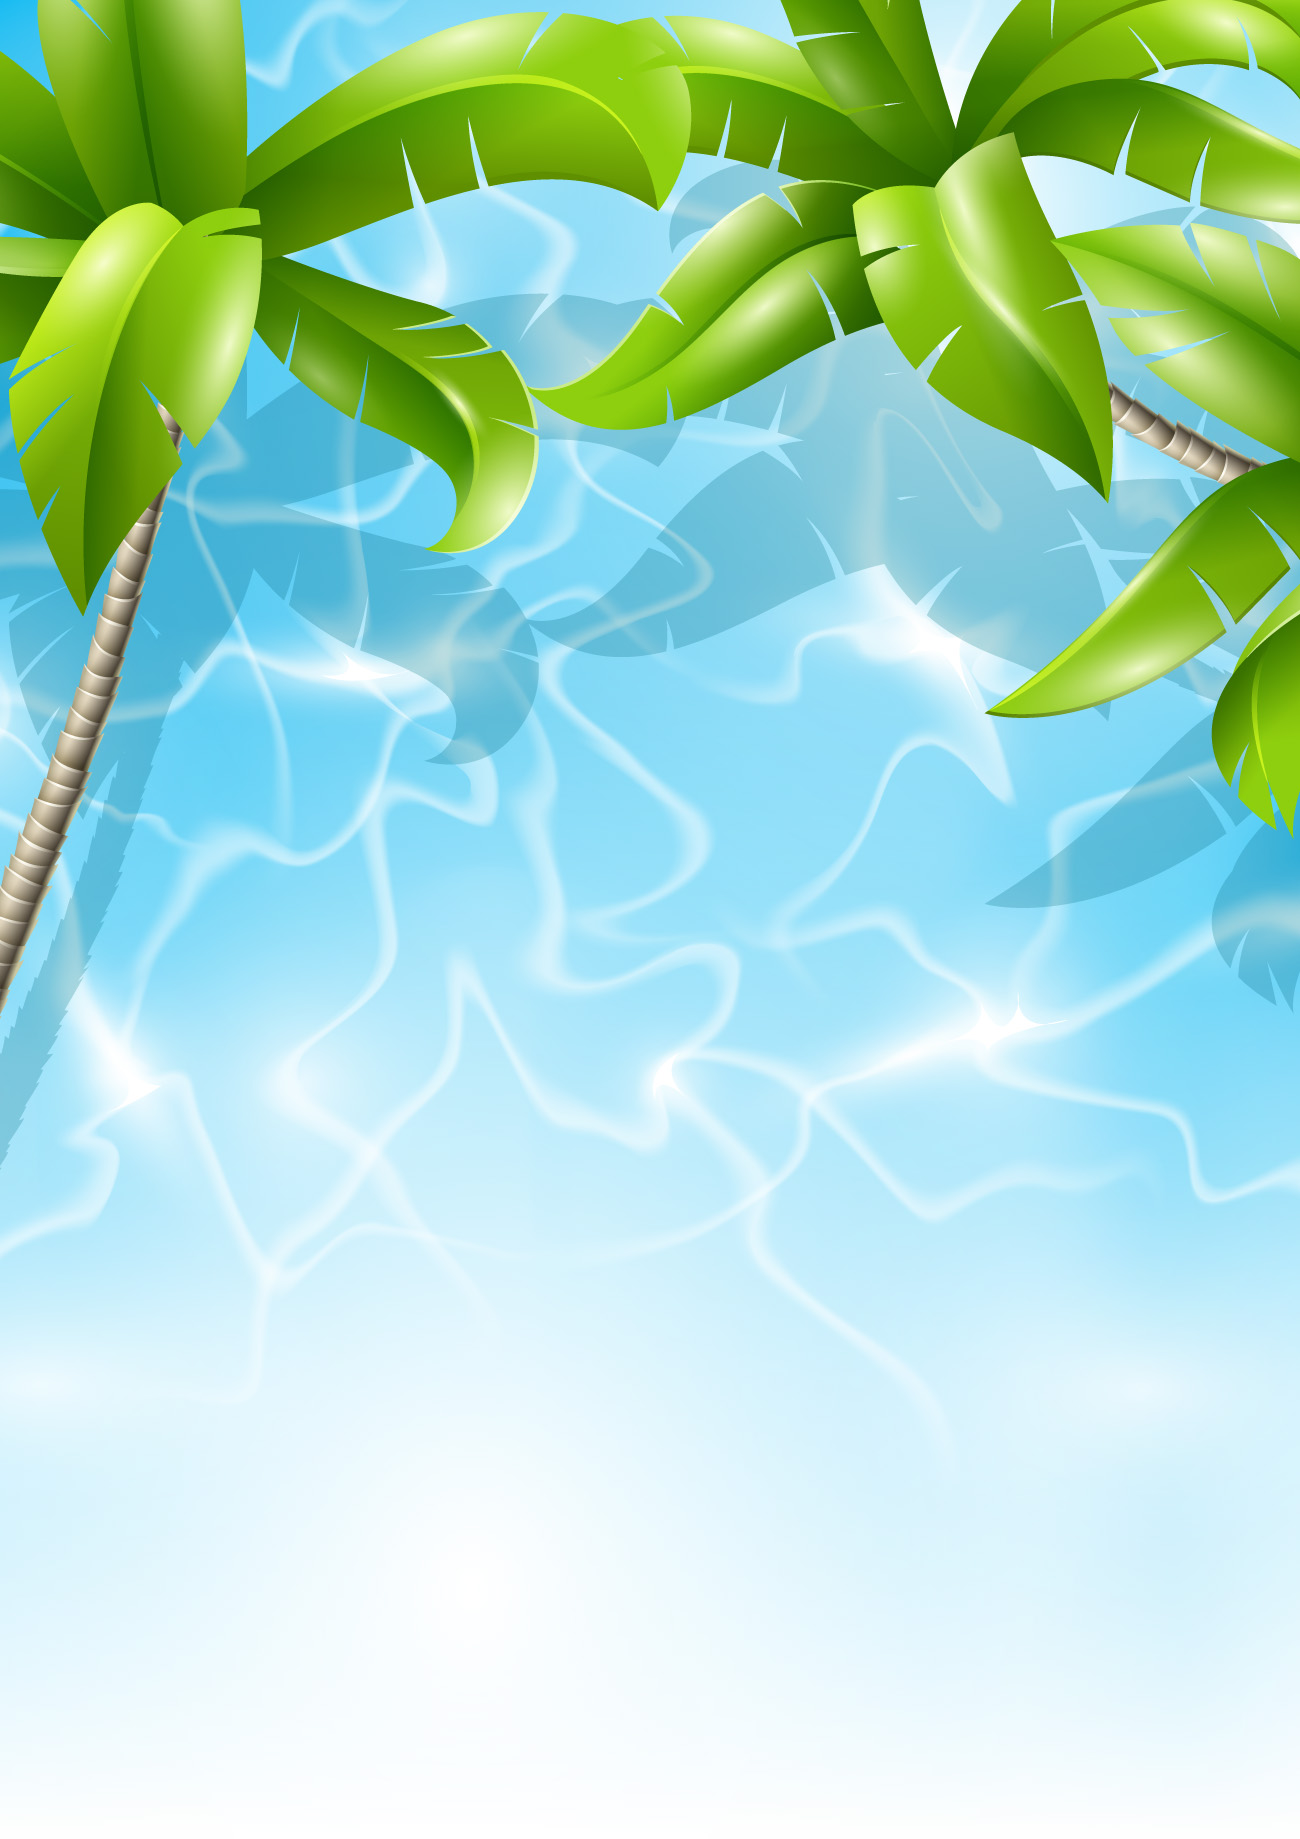 Beautiful Tropical Backgrounds vector 01 free download